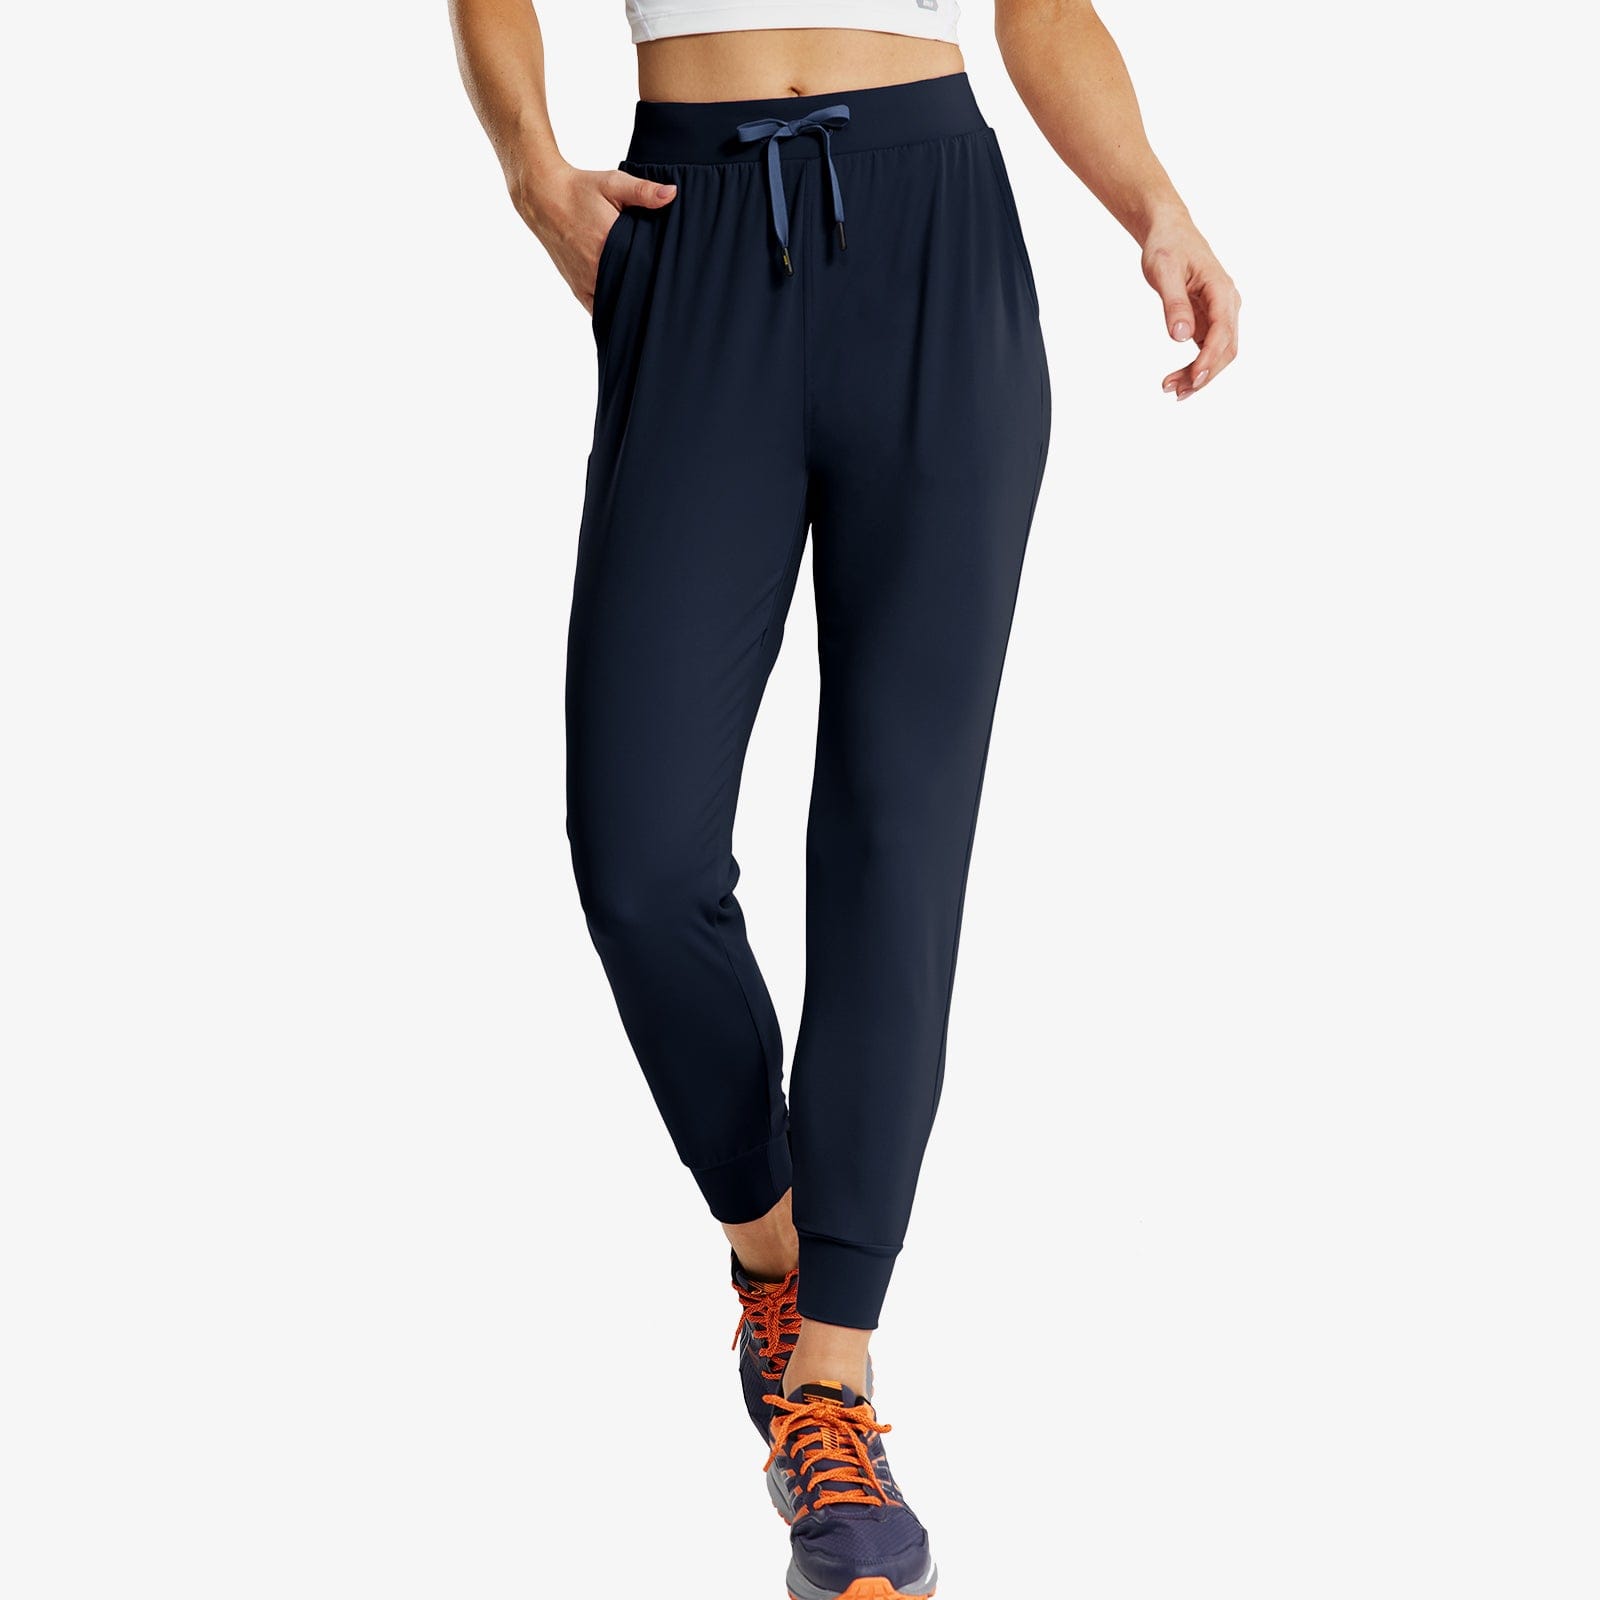 Women's Joggers with Pockets Lightweight Athletic Sweatpants - Dark Blue /  XS